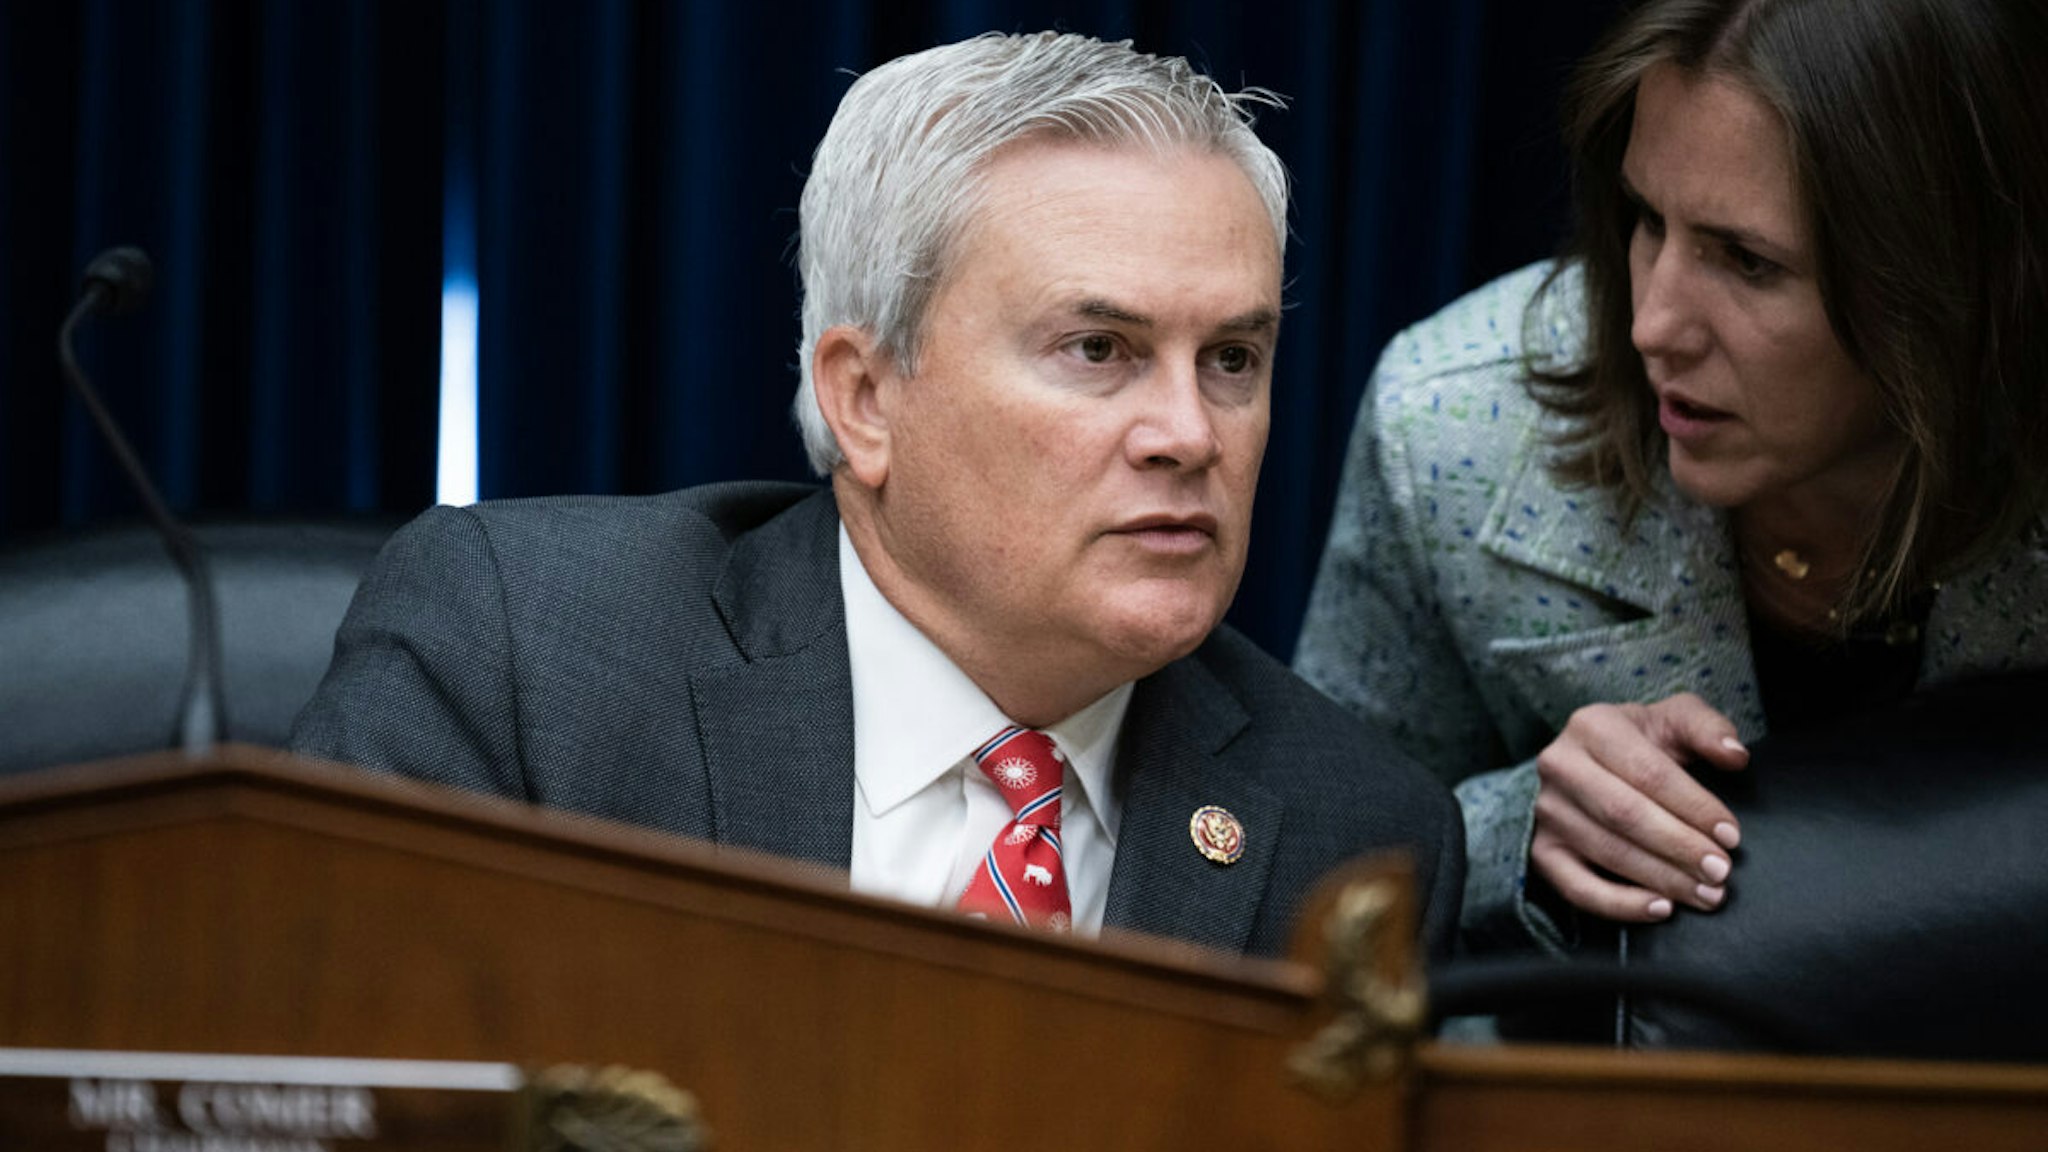 Chairman James Comer, R-Ky., talks with an aide during the House Oversight and Accountability Committee hearing titled "Overdue Oversight of the Capital City: Part II," in Rayburn Building on Tuesday, May 16, 2023.